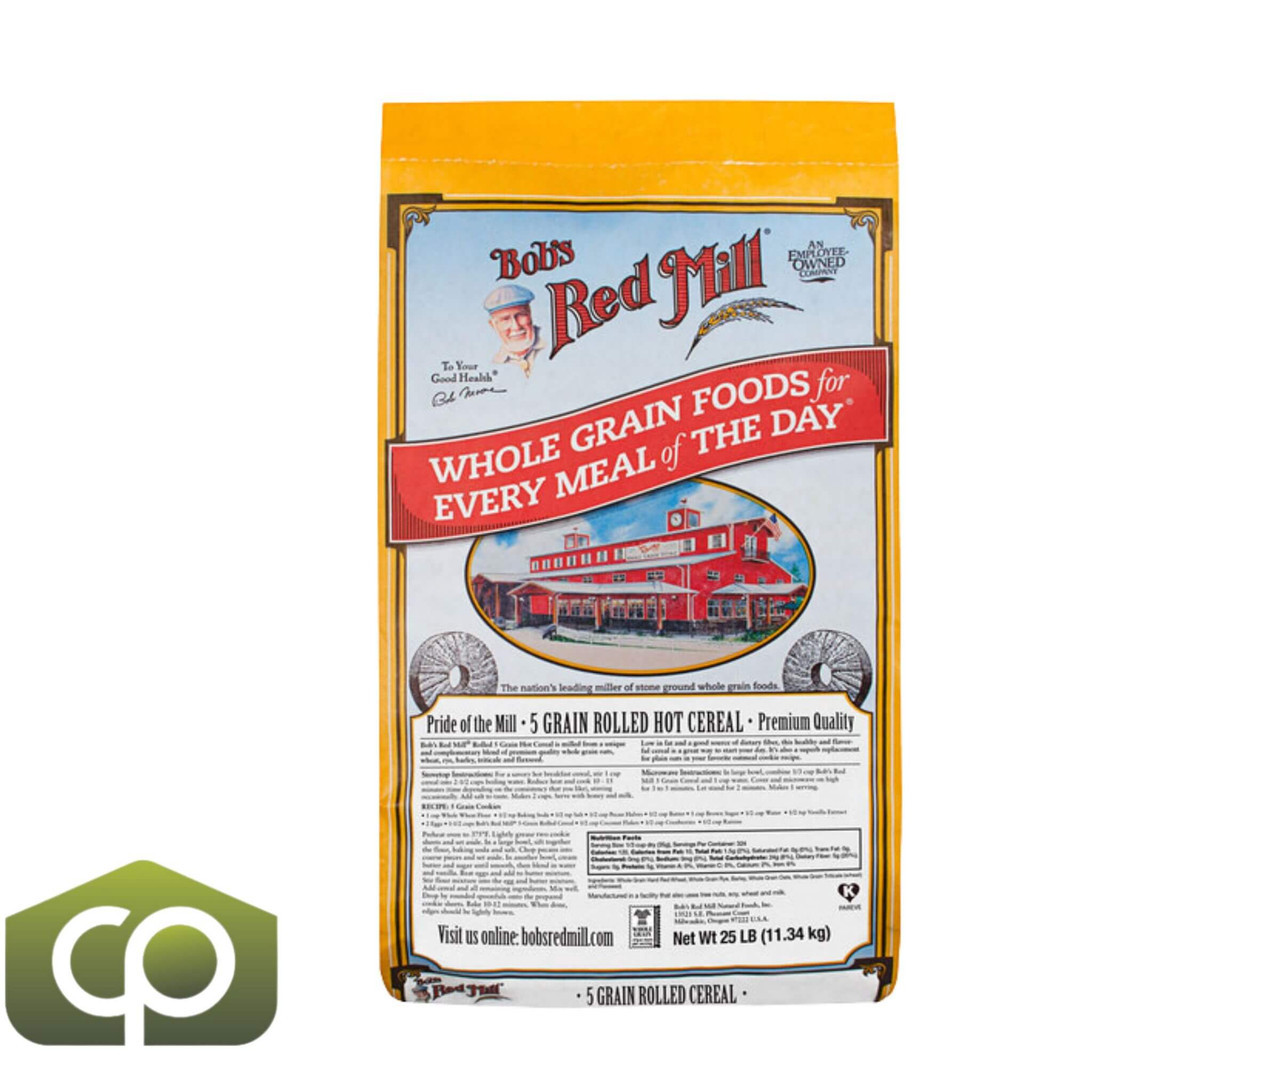 Bob's Red Mill 25 lbs. (11.34 kg) 5-Grain Rolled Cereal (60 BAGS/PALLET) - Chicken Pieces